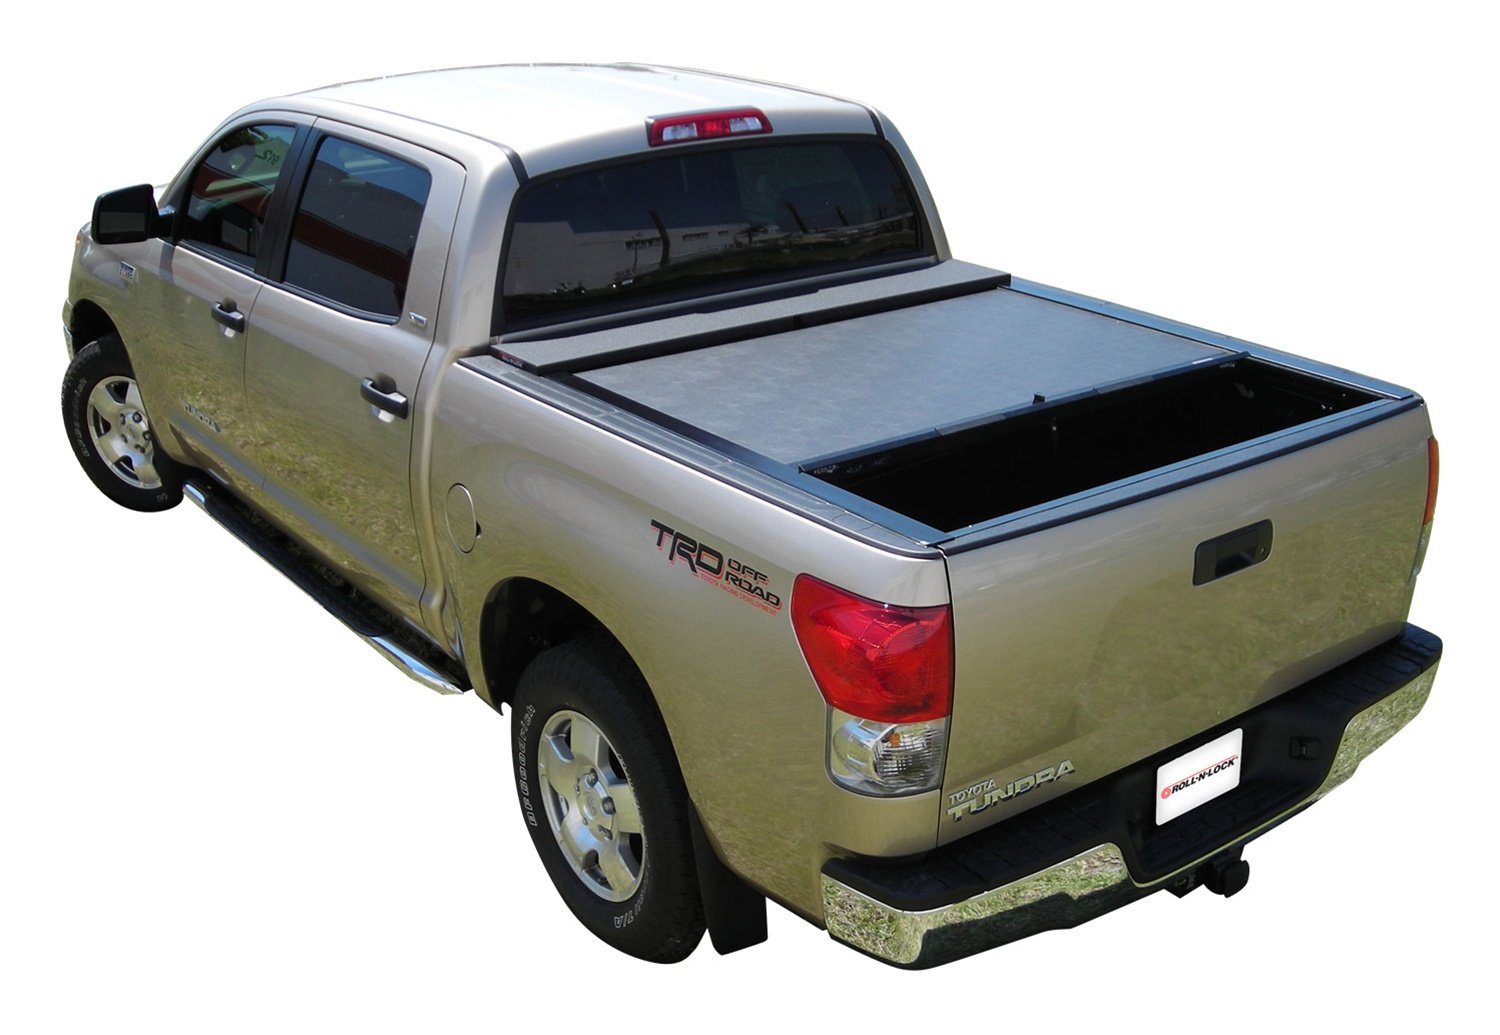 LG571M M-Series Locking Retractable Truck Bed Cover for 2007-2021 Toyota Tundra Regular/Double Cab [6.5 ft. Bed]